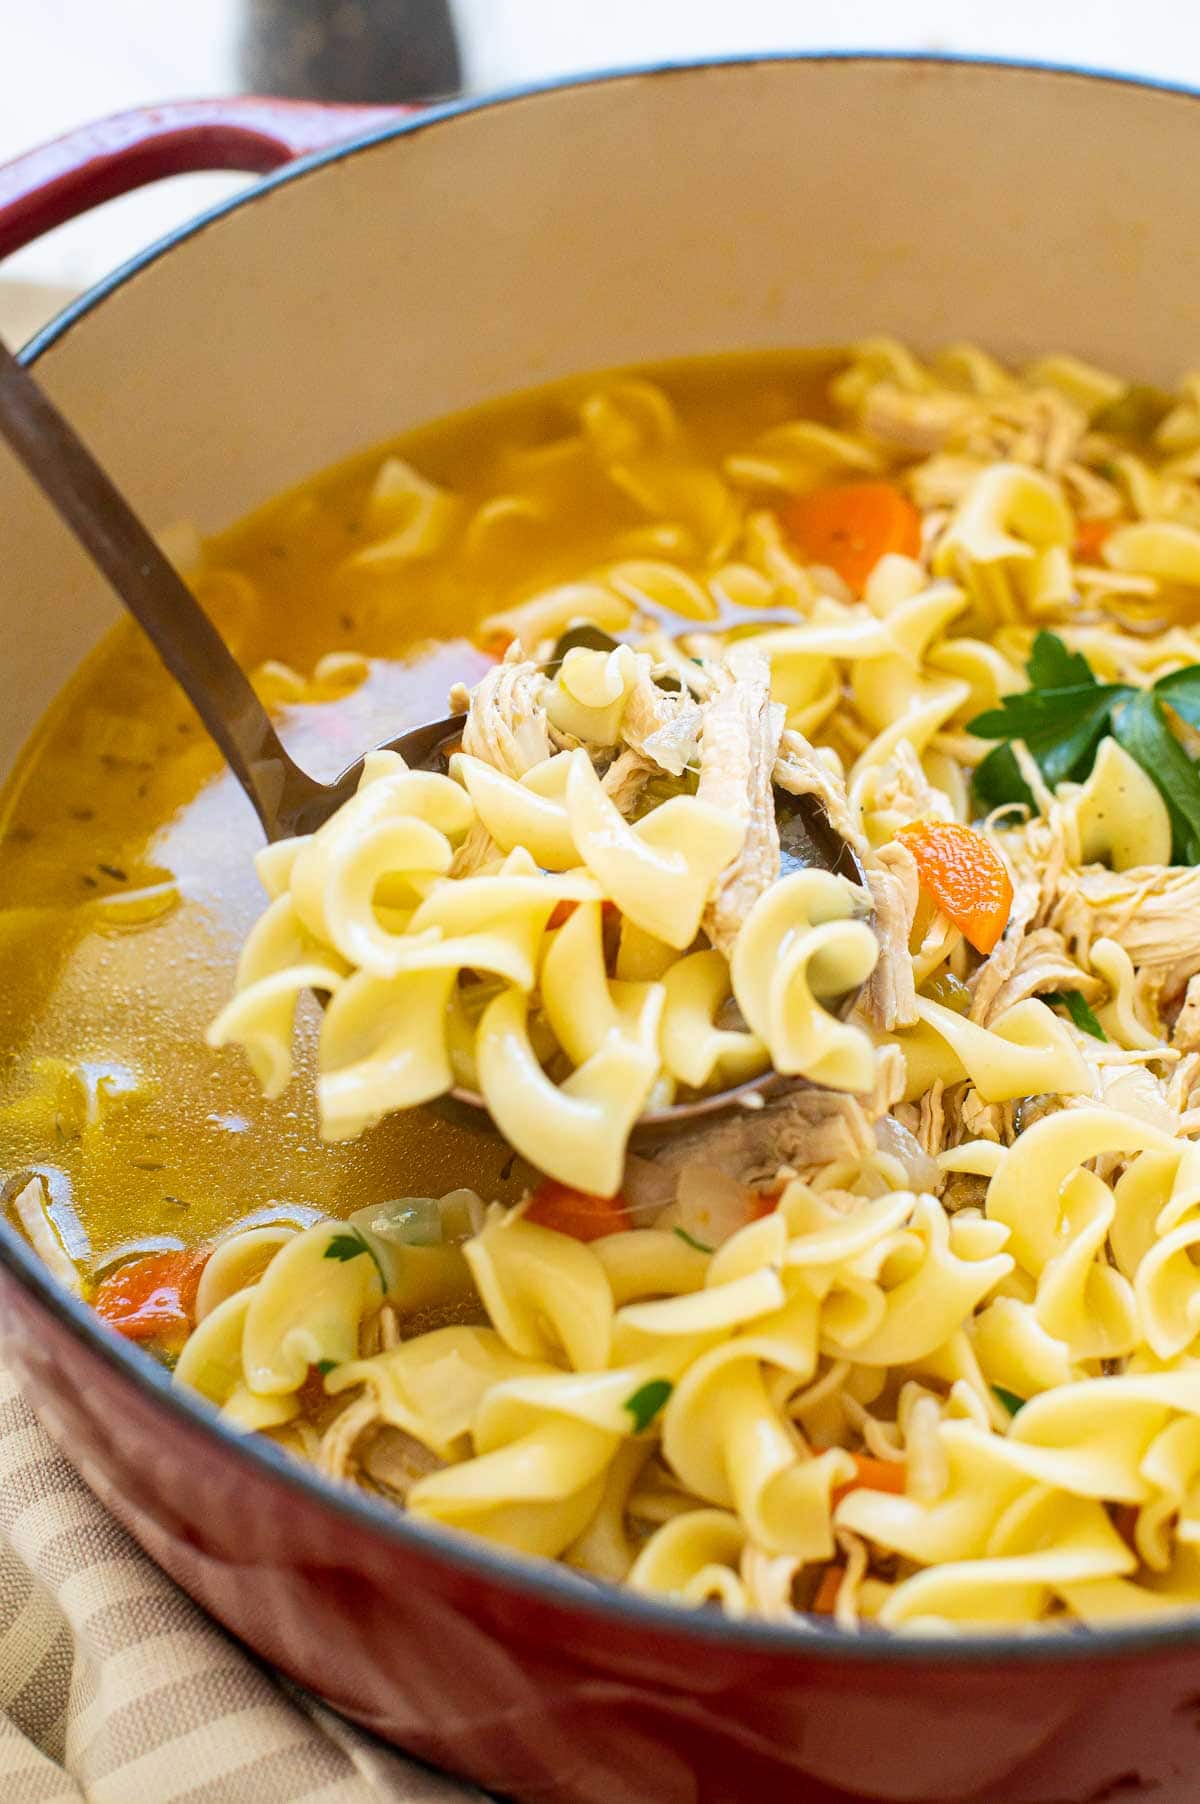 Egg noodles, shredded turkey, carrots and broth on a ladle above the pot of soup.